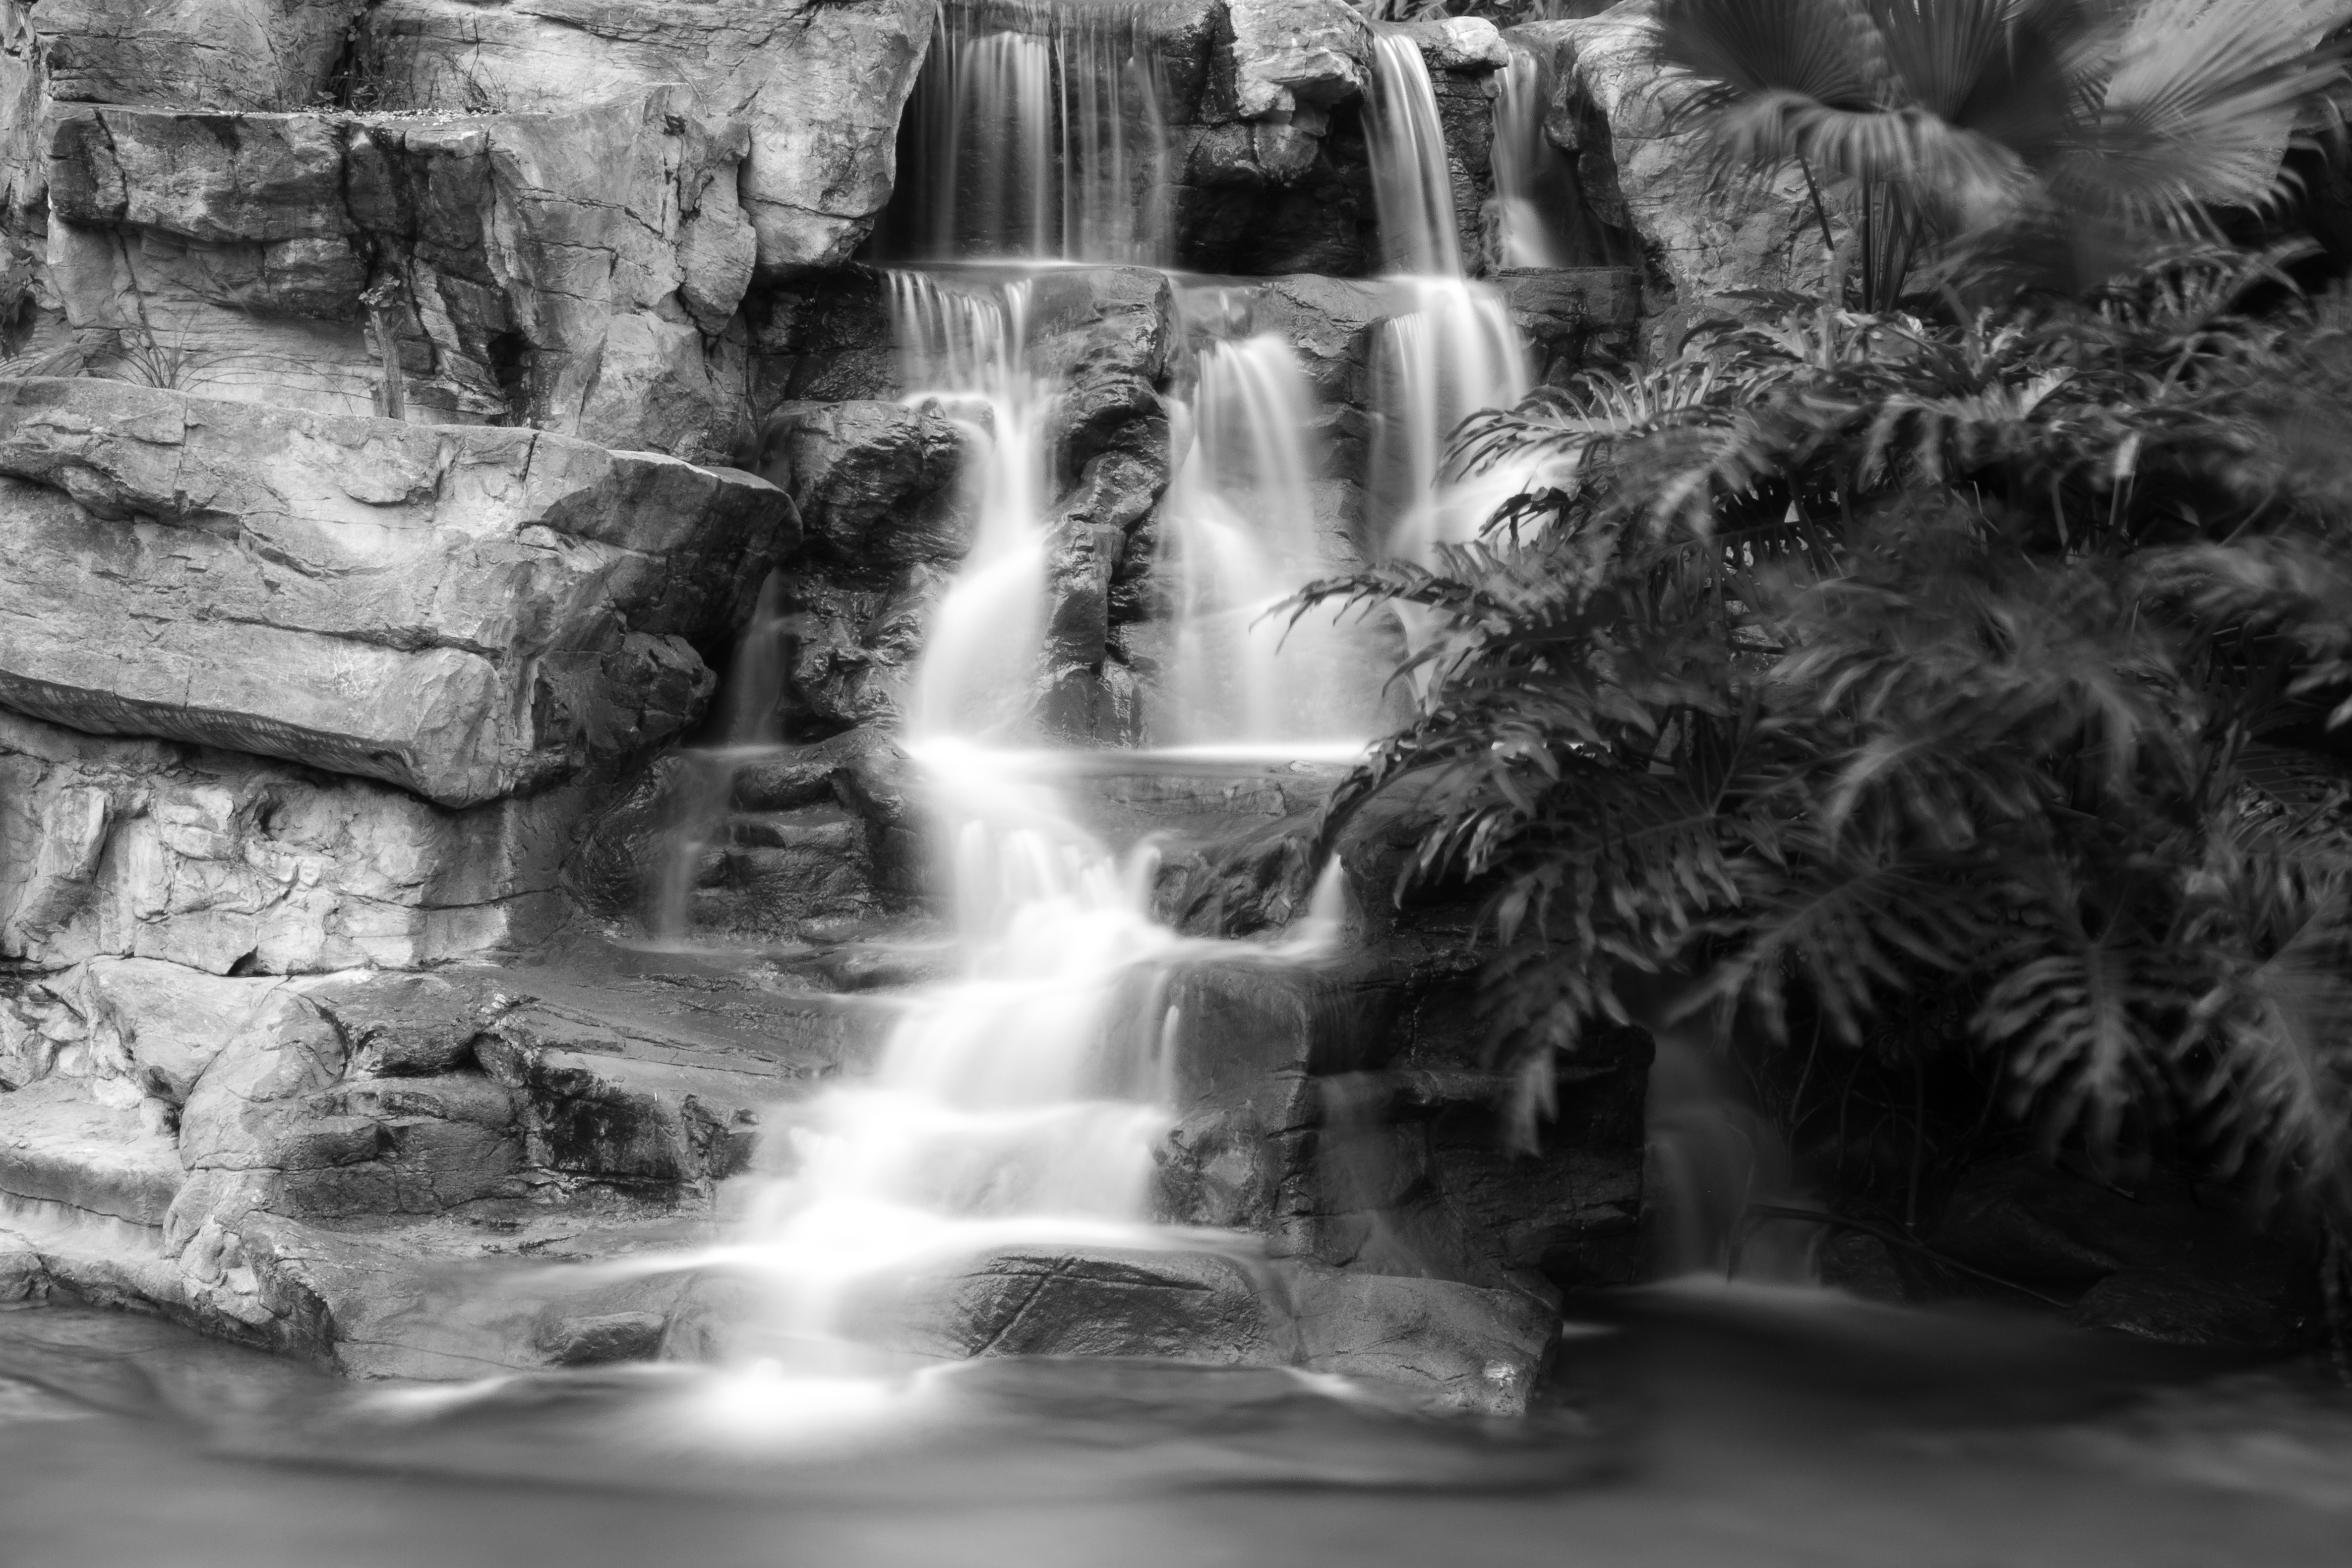 Water flowing amongst rockery Serenity (Long exposure with ND Filter) (8640749744)